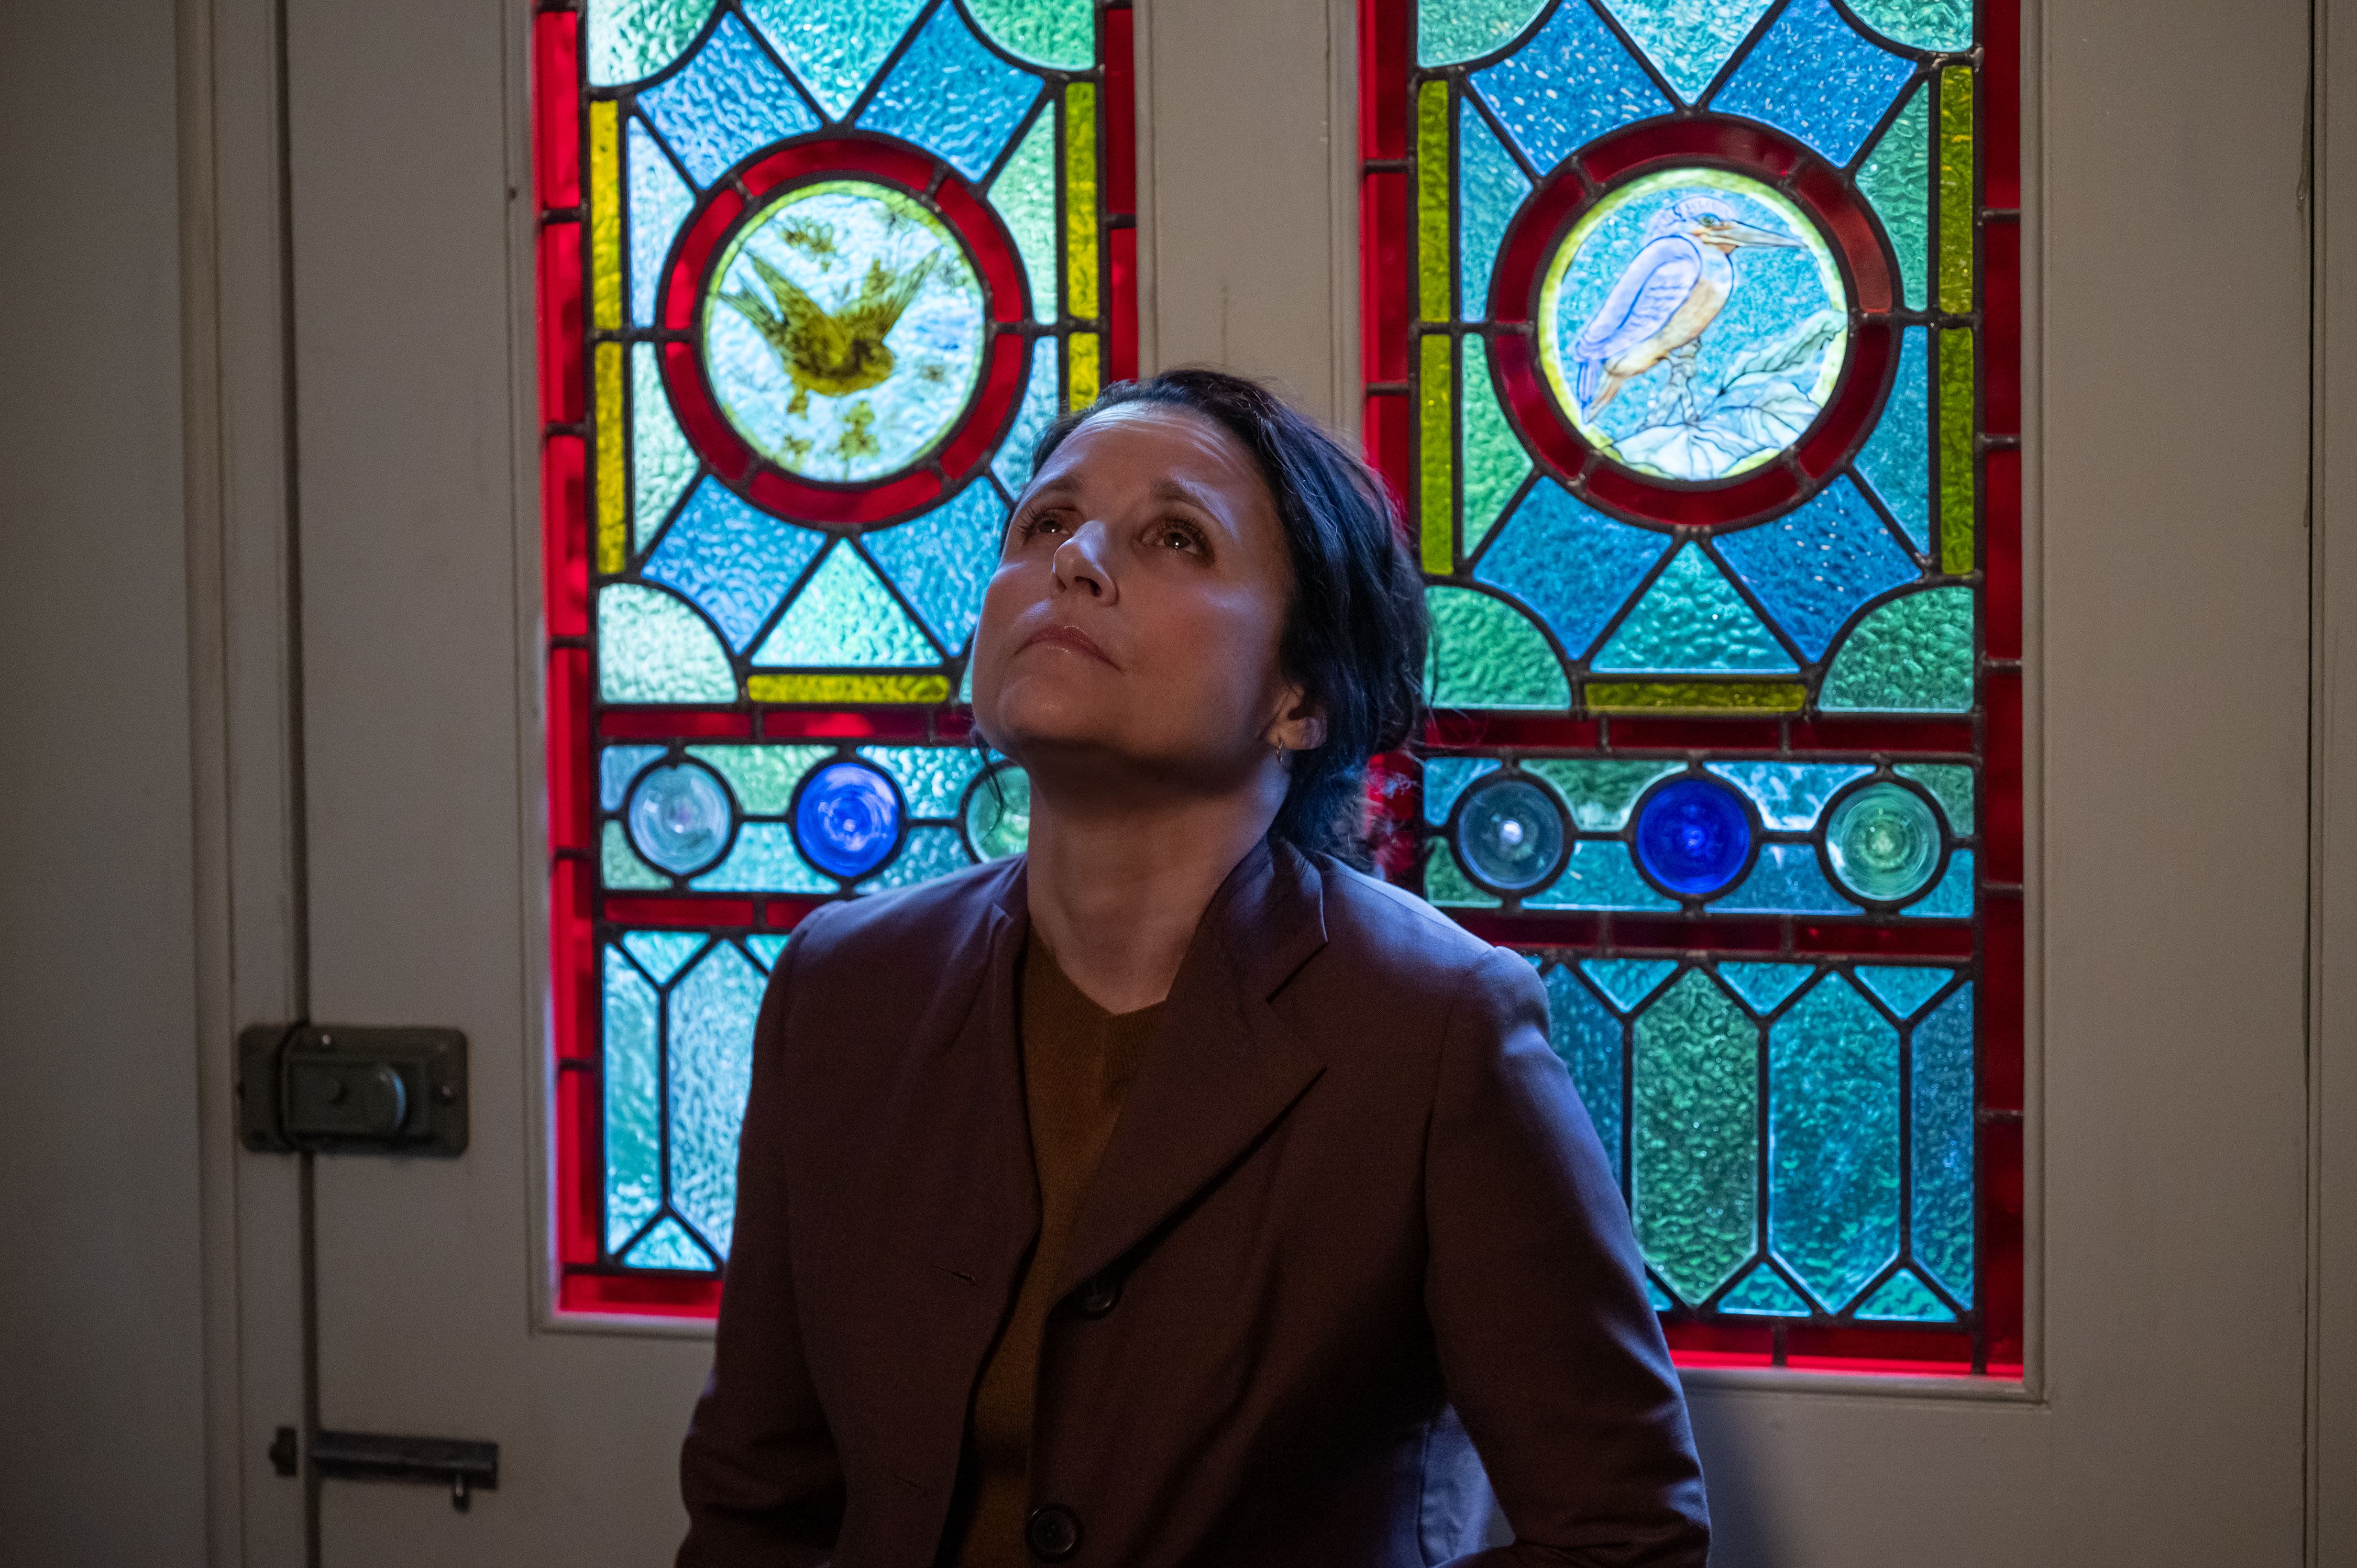 Julia Louis-Dreyfus and Lola Petticrew Talk About Facing Death (Who’s a Parrot) In ‘Tuesday’